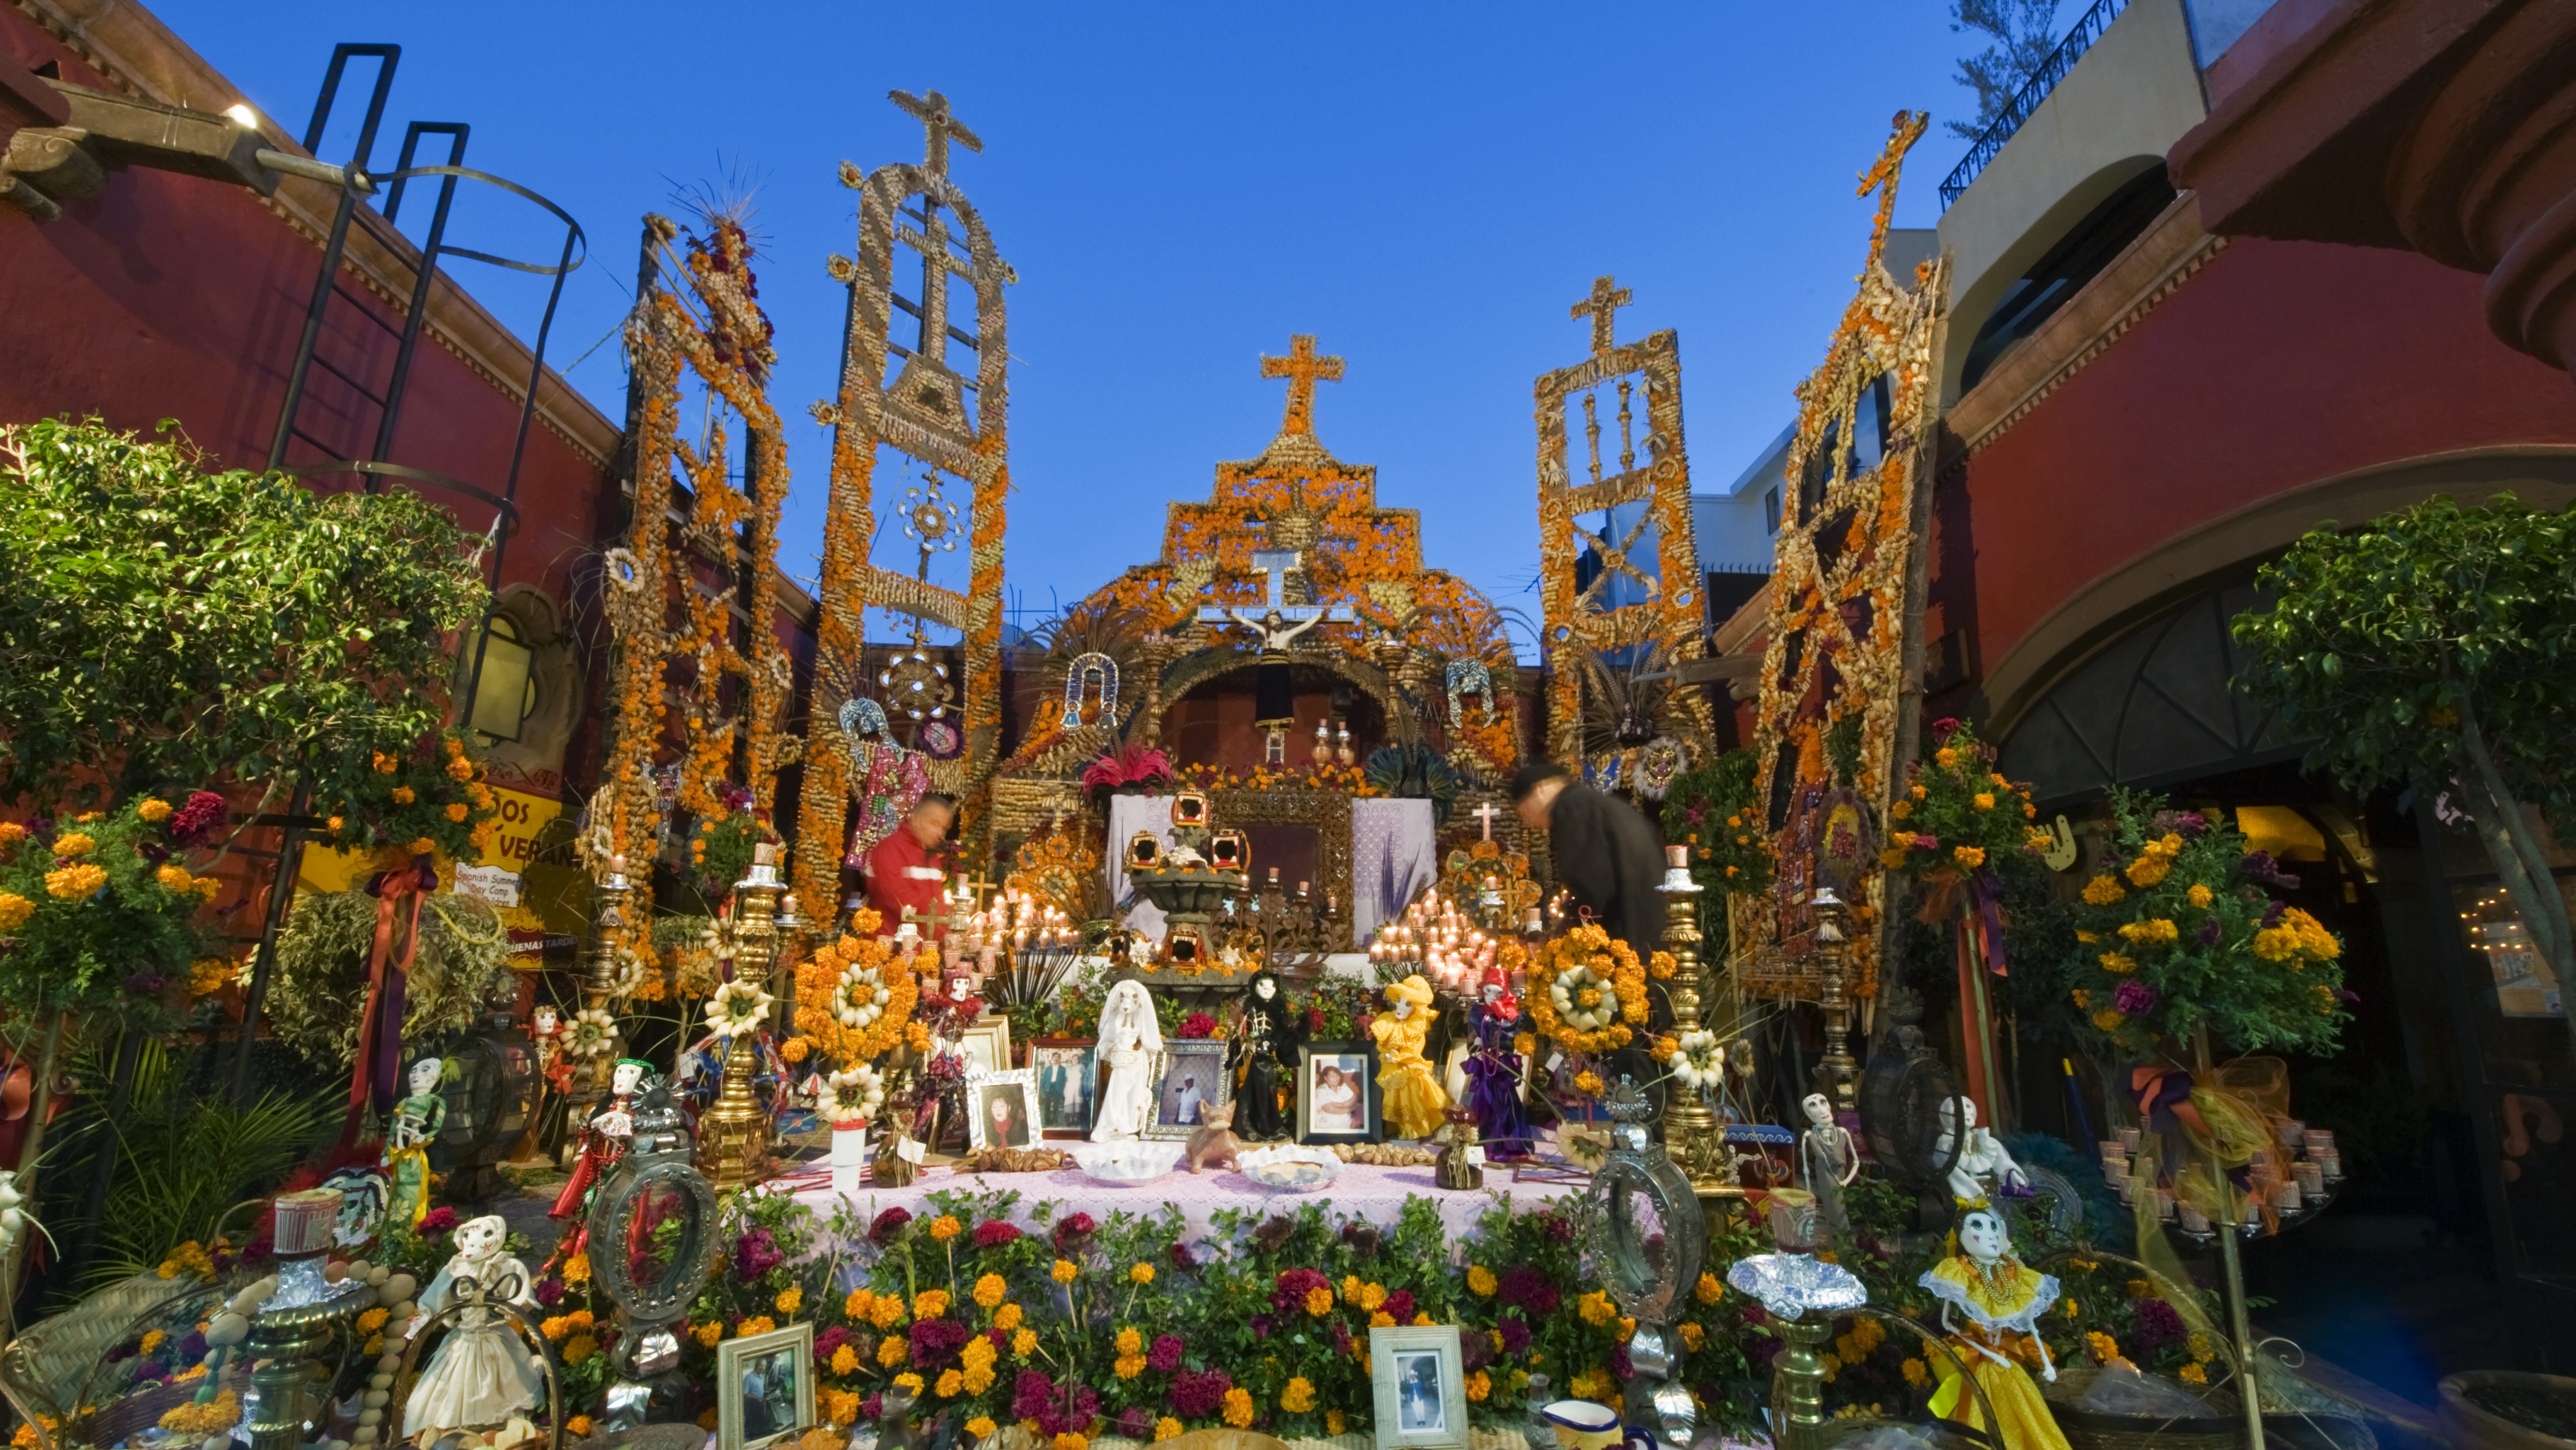 Day of the Dead altar in Mexico